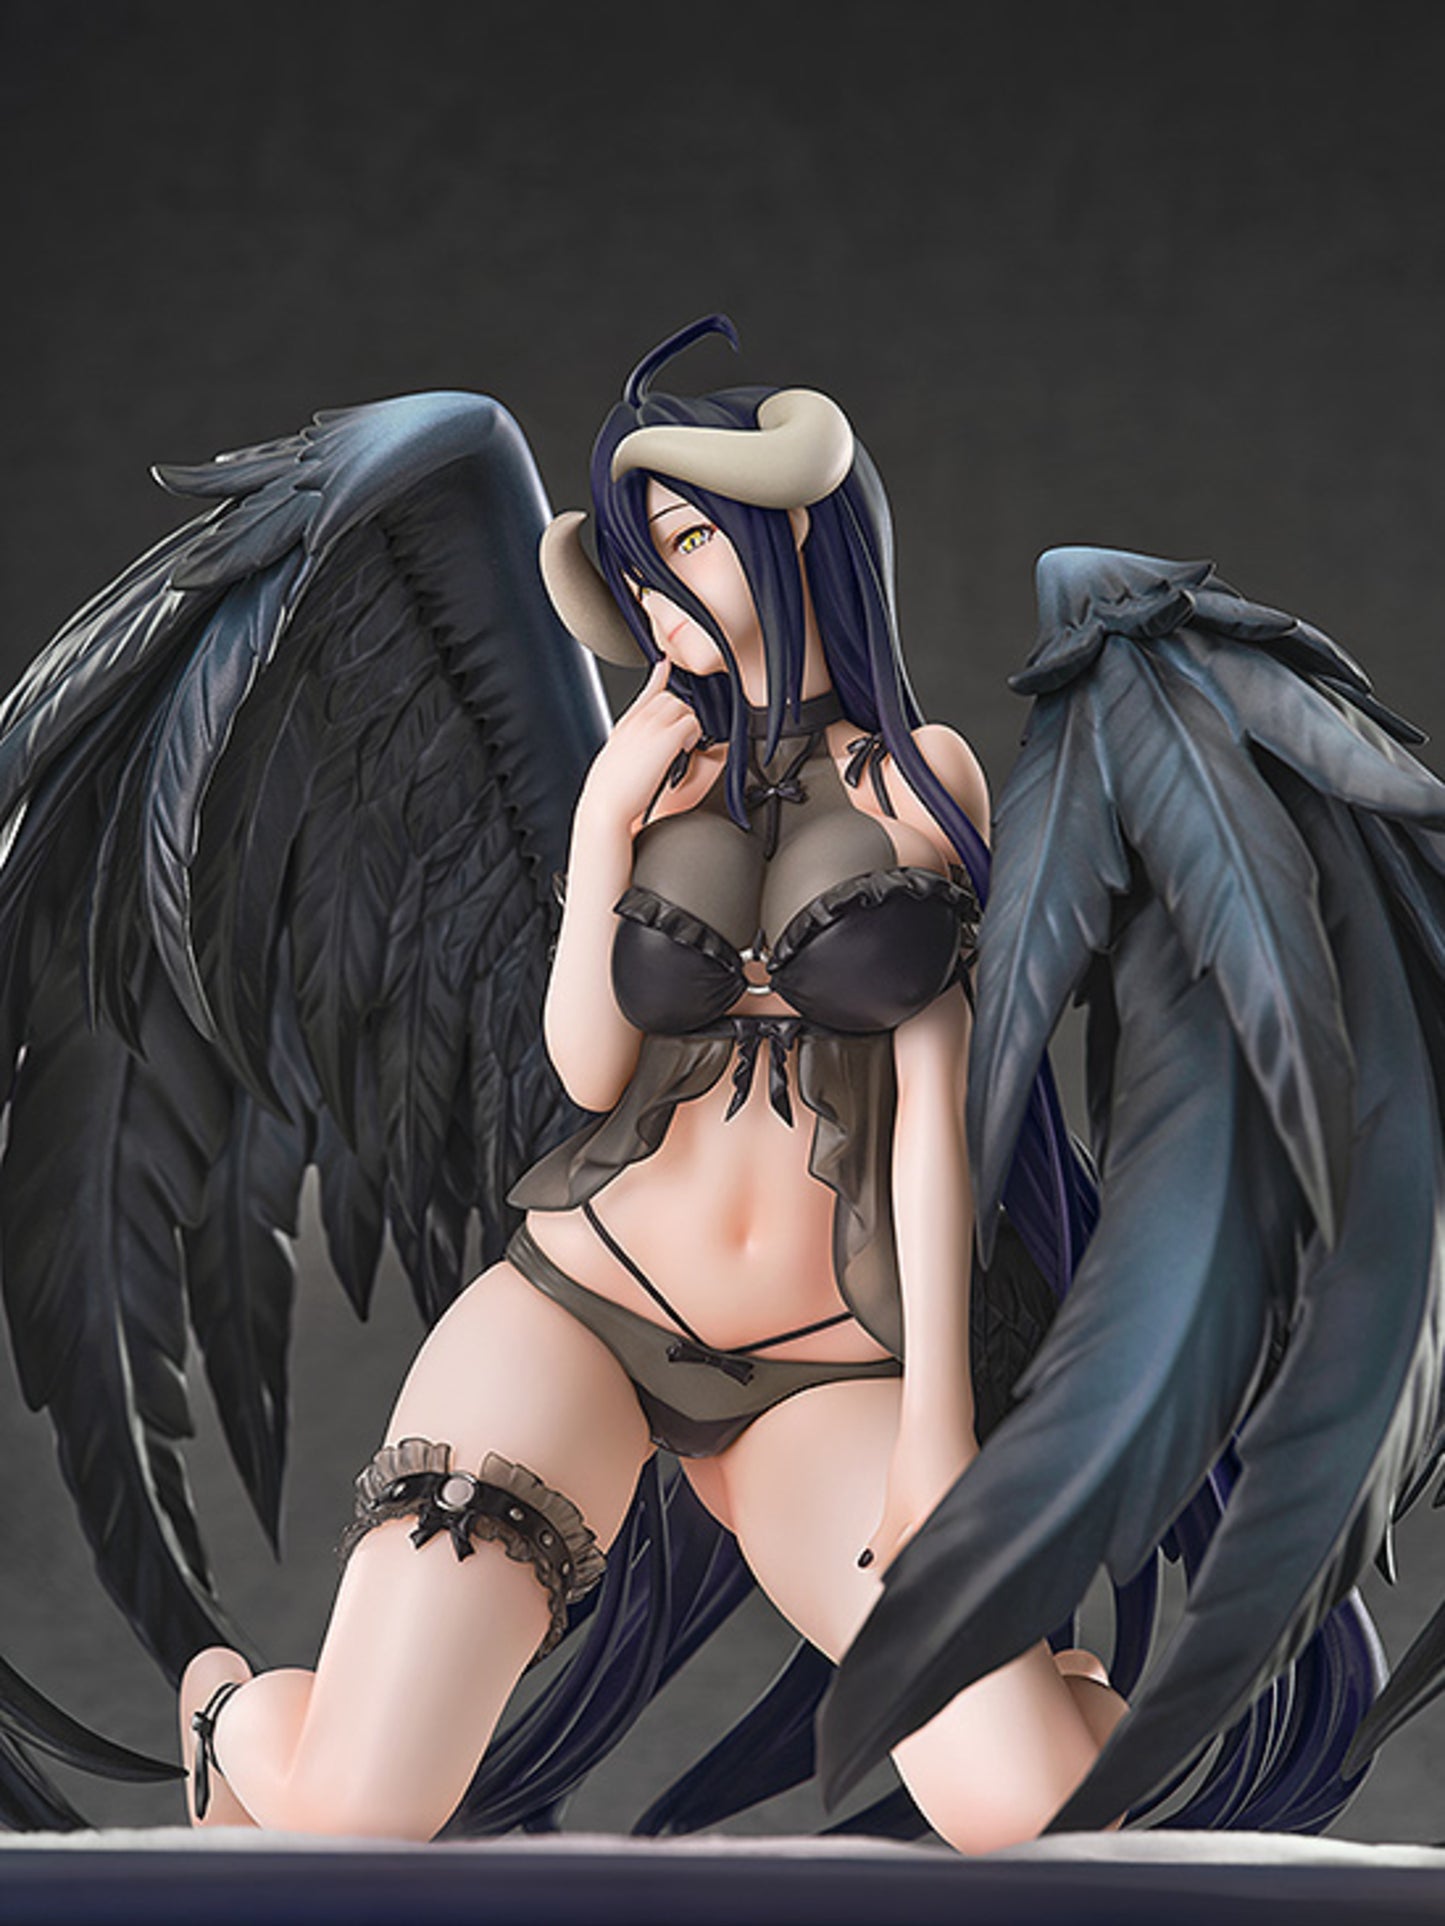 Overlord - Albedo Negligee Ver. Scale 1:7 Figure (Coming Soon)